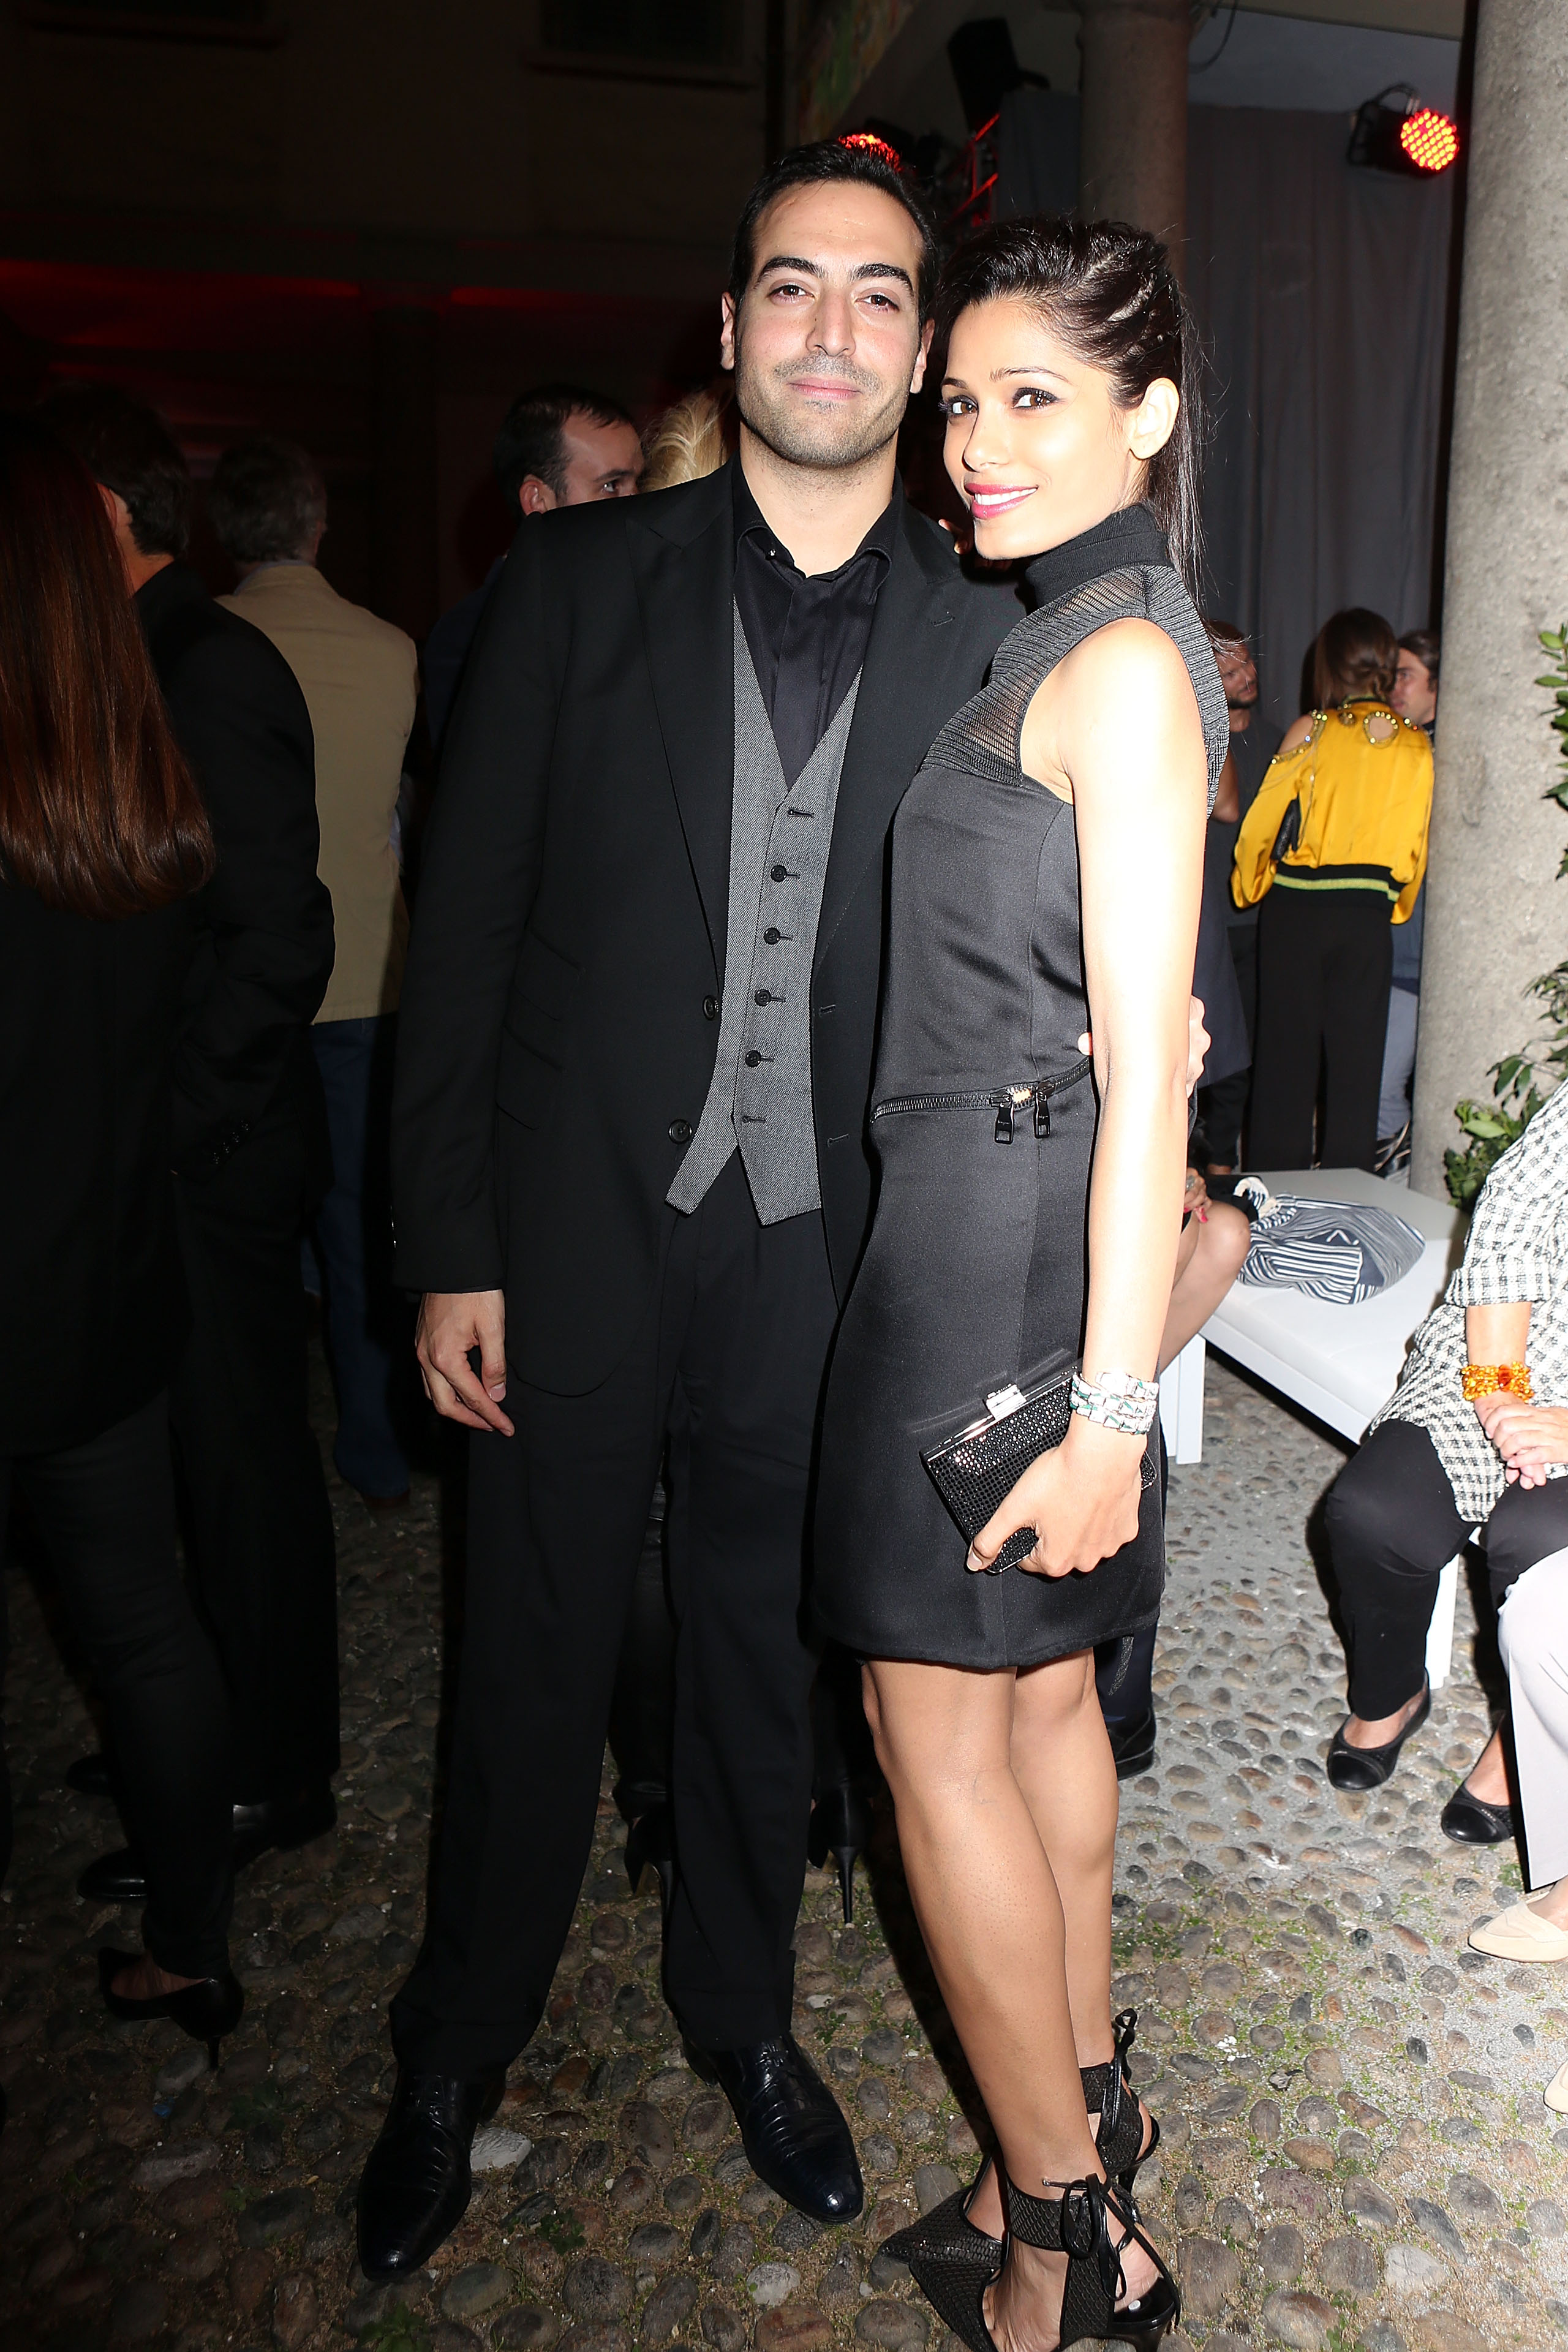 MILAN, ITALY - SEPTEMBER 20: Mohammed Al Turki and Freida Pinto attend the Salvatore Ferragamo Boutique Opening as part of Milan Fashion Week Womenswear Spring/Summer 2014 on September 20, 2013 in Milan, Italy.